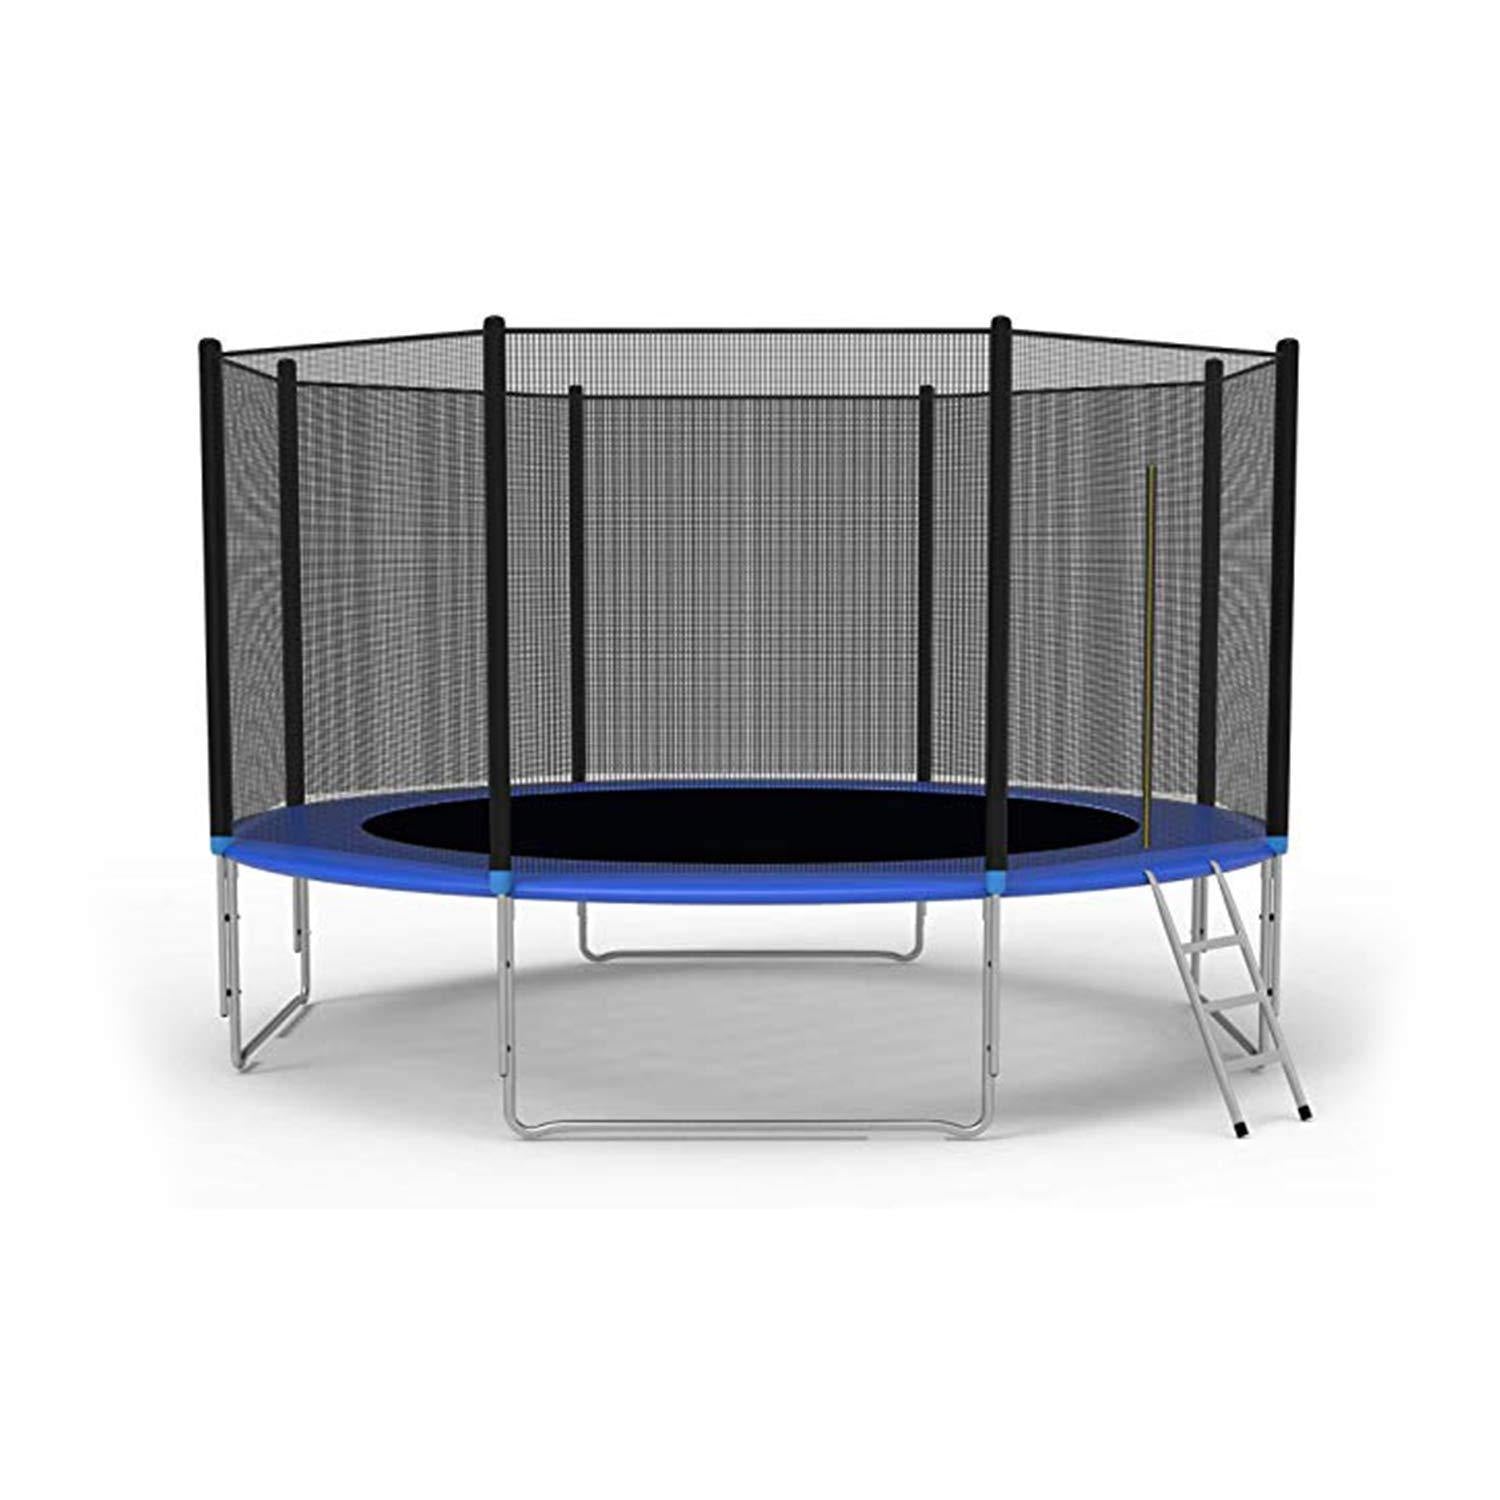 (Out of Stock) Part2 and Part7 of The 10 Feet Outdoor Trampoline Bounce Combo with Safety Enclosure And Spring Pad